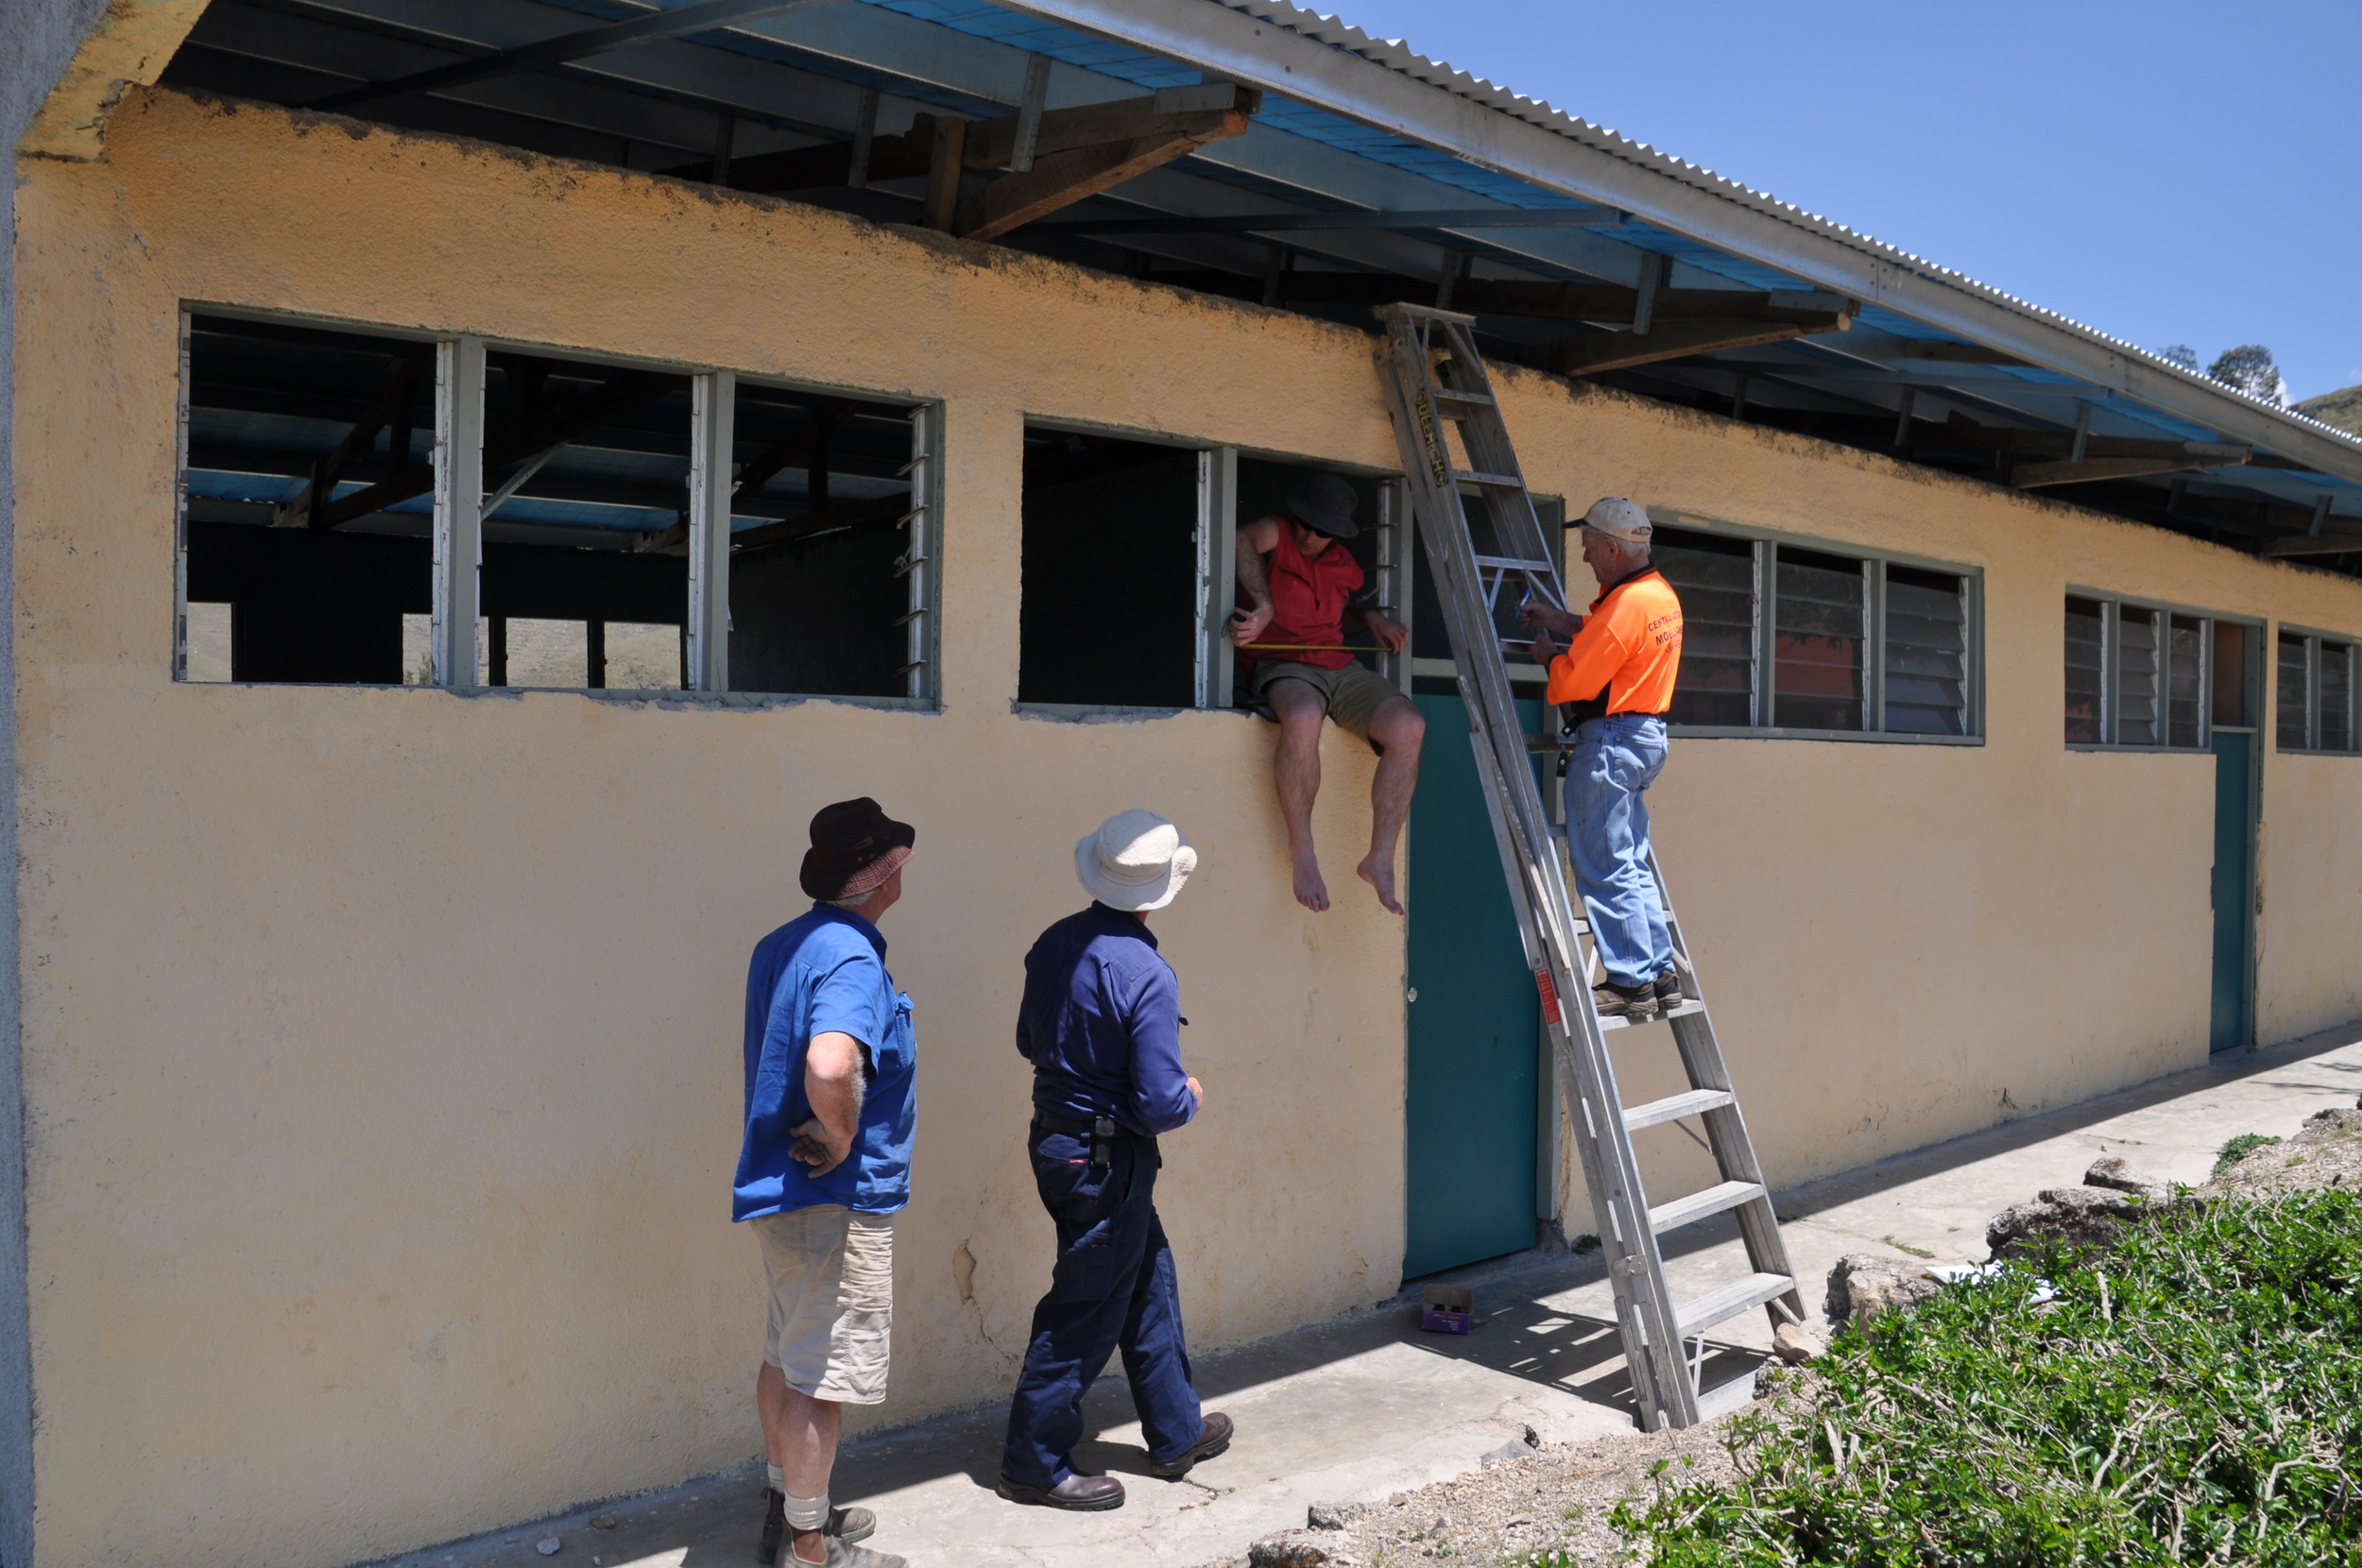 The school at Flecha, Timor-Leste, doubled in size when the derelict buildings were re-built by the Rotary team from Australia